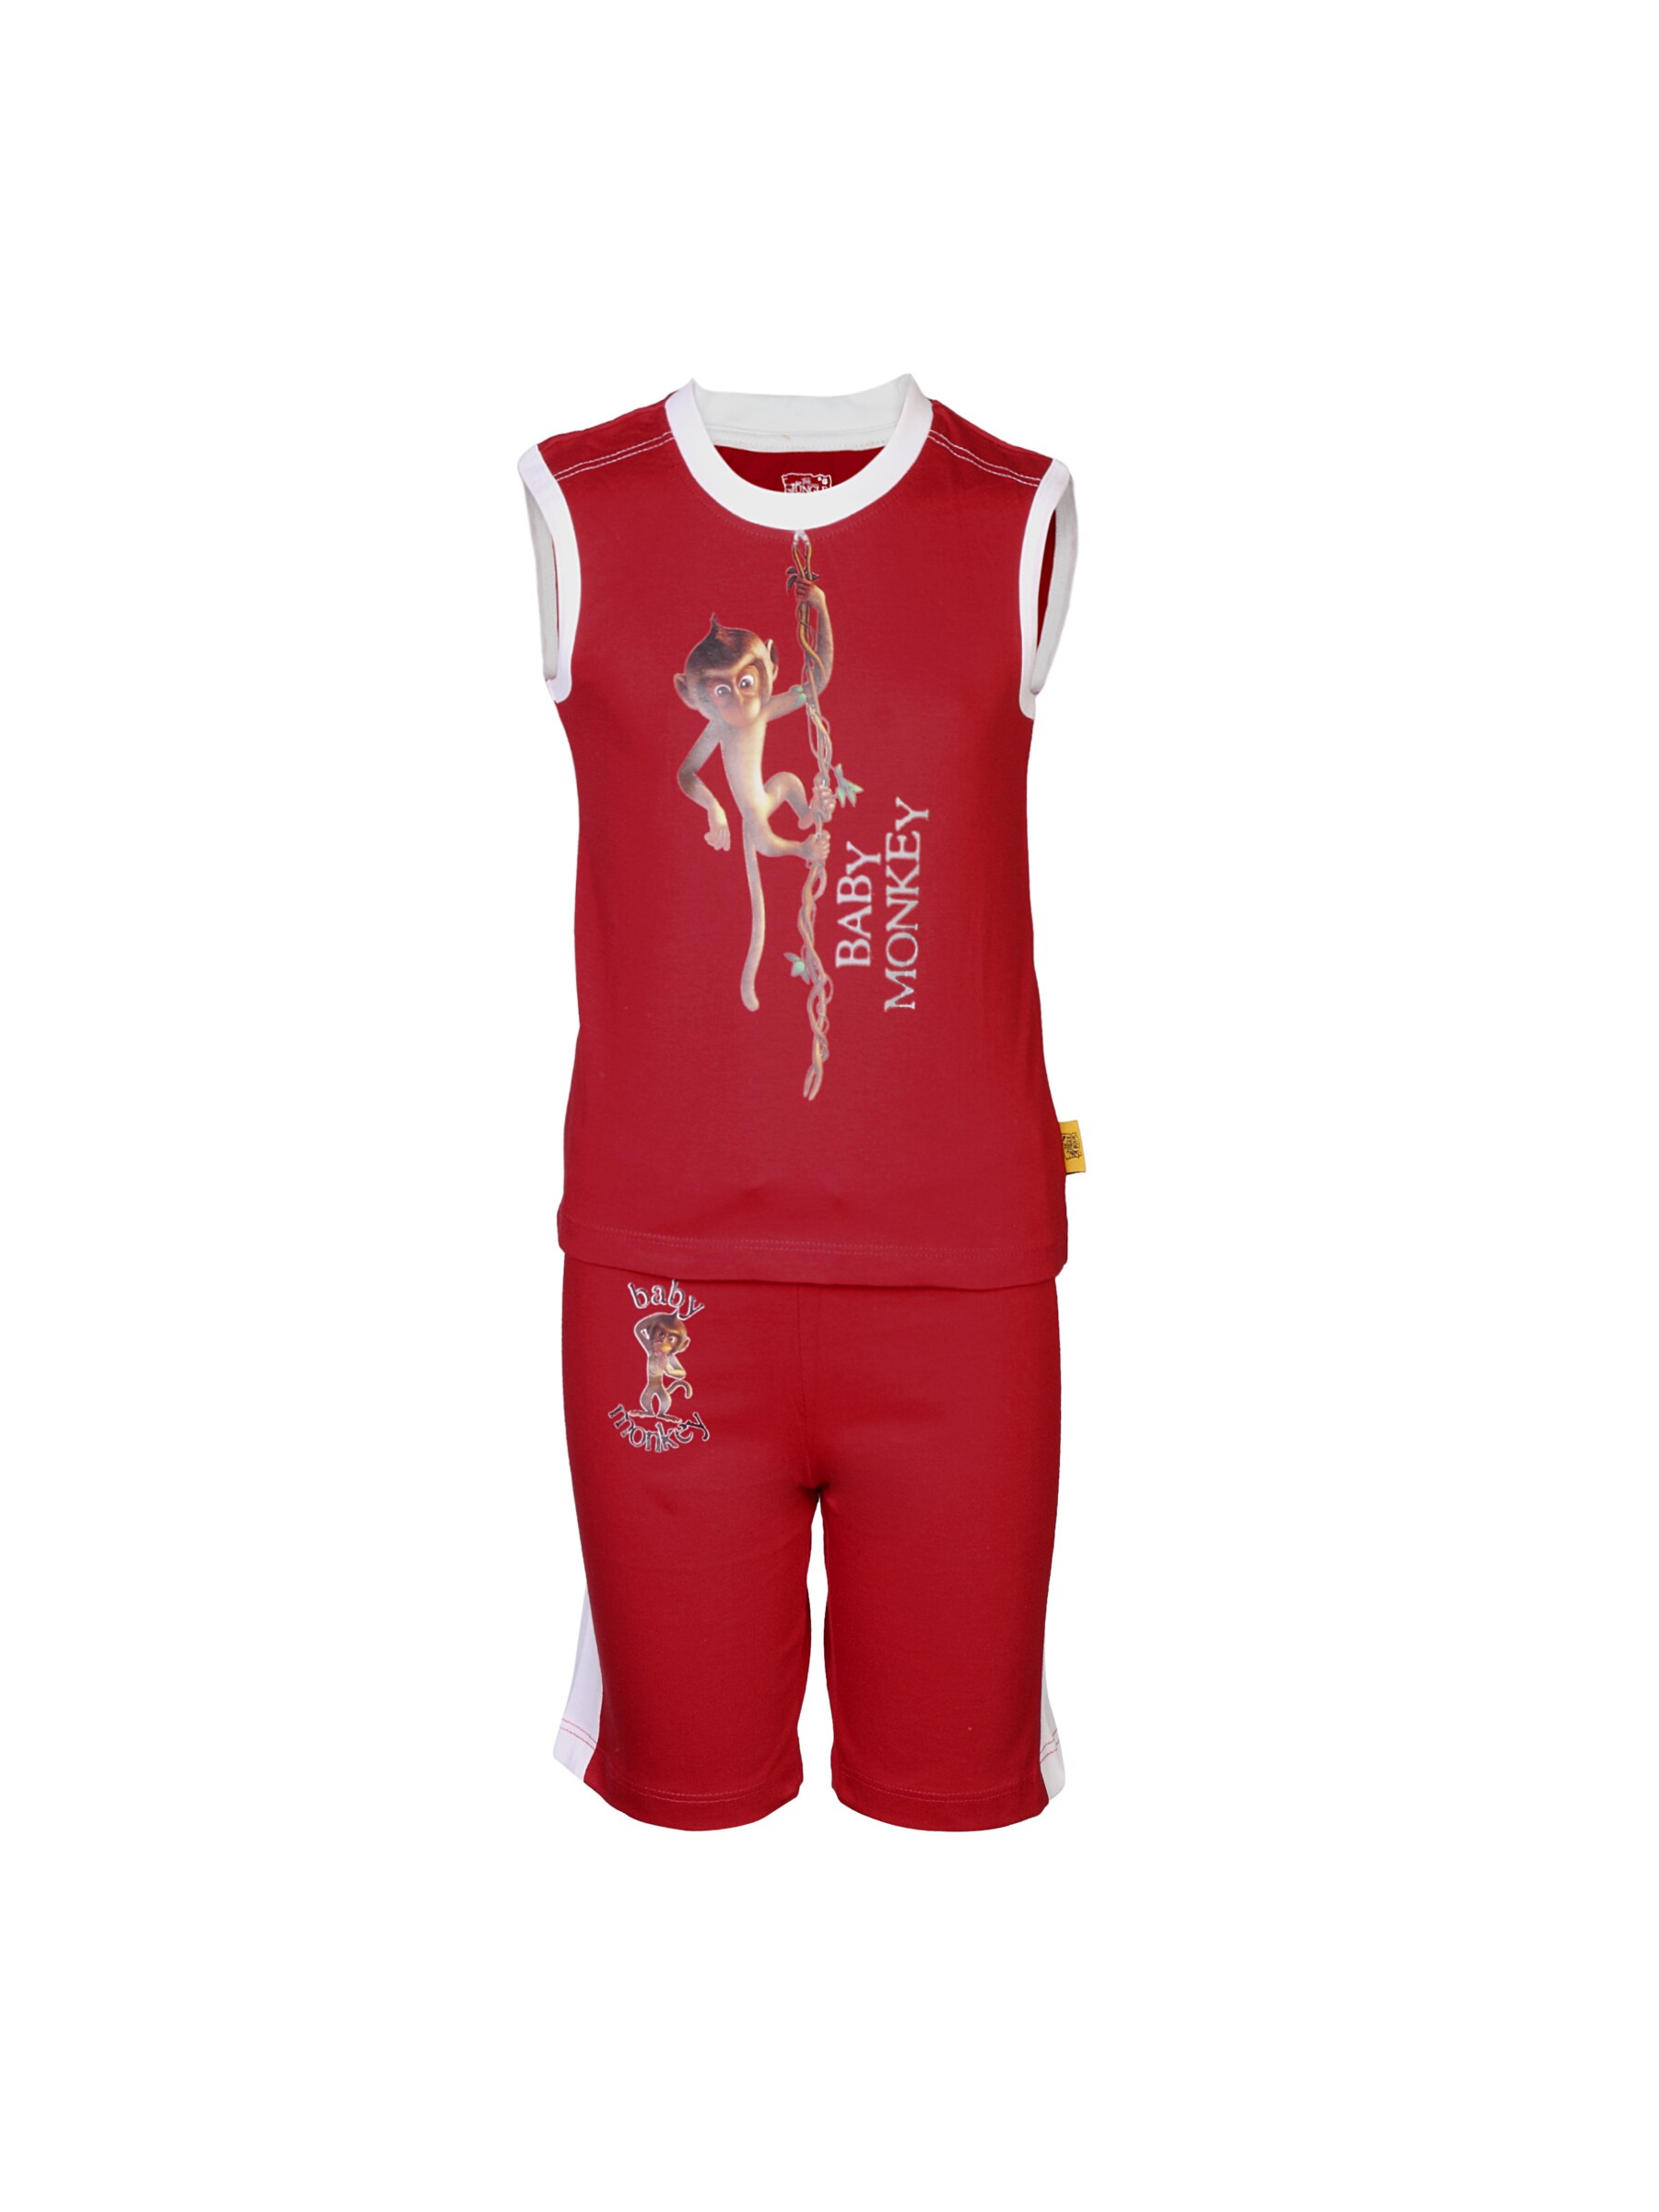 Jungle Book Boys Baby Red Clothing Set